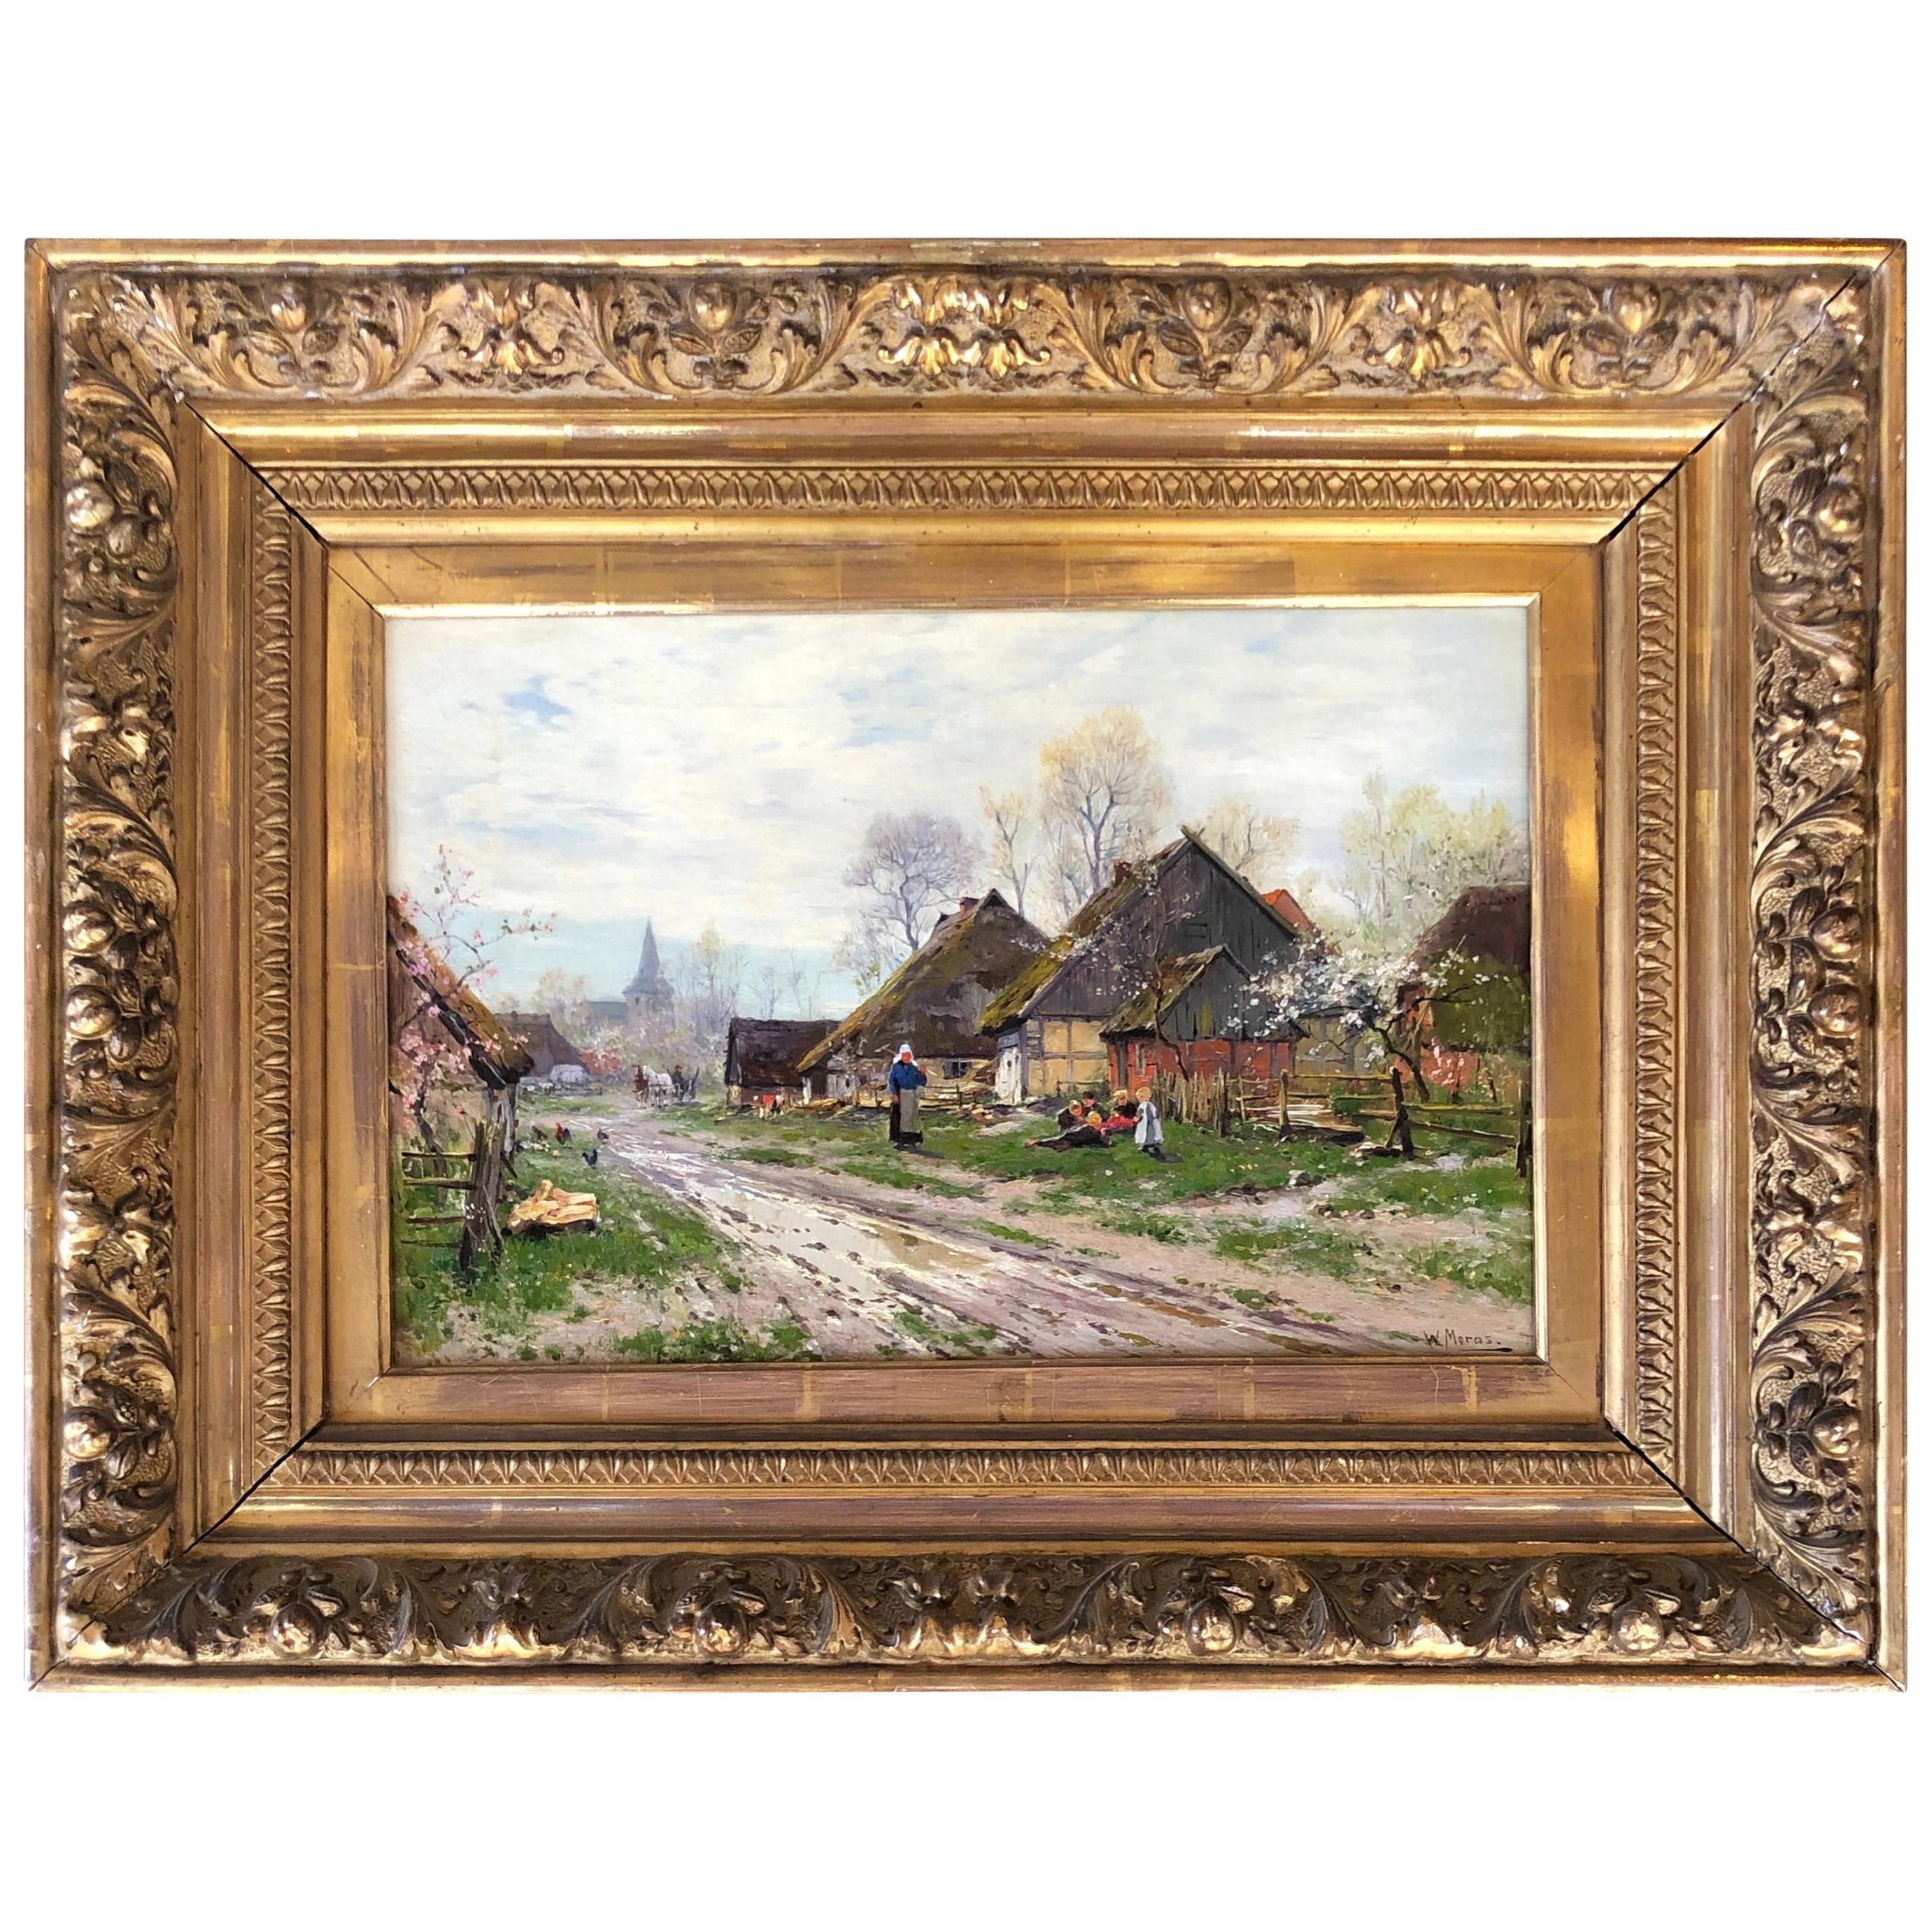 "The Farm in Spring" by Walter Moras